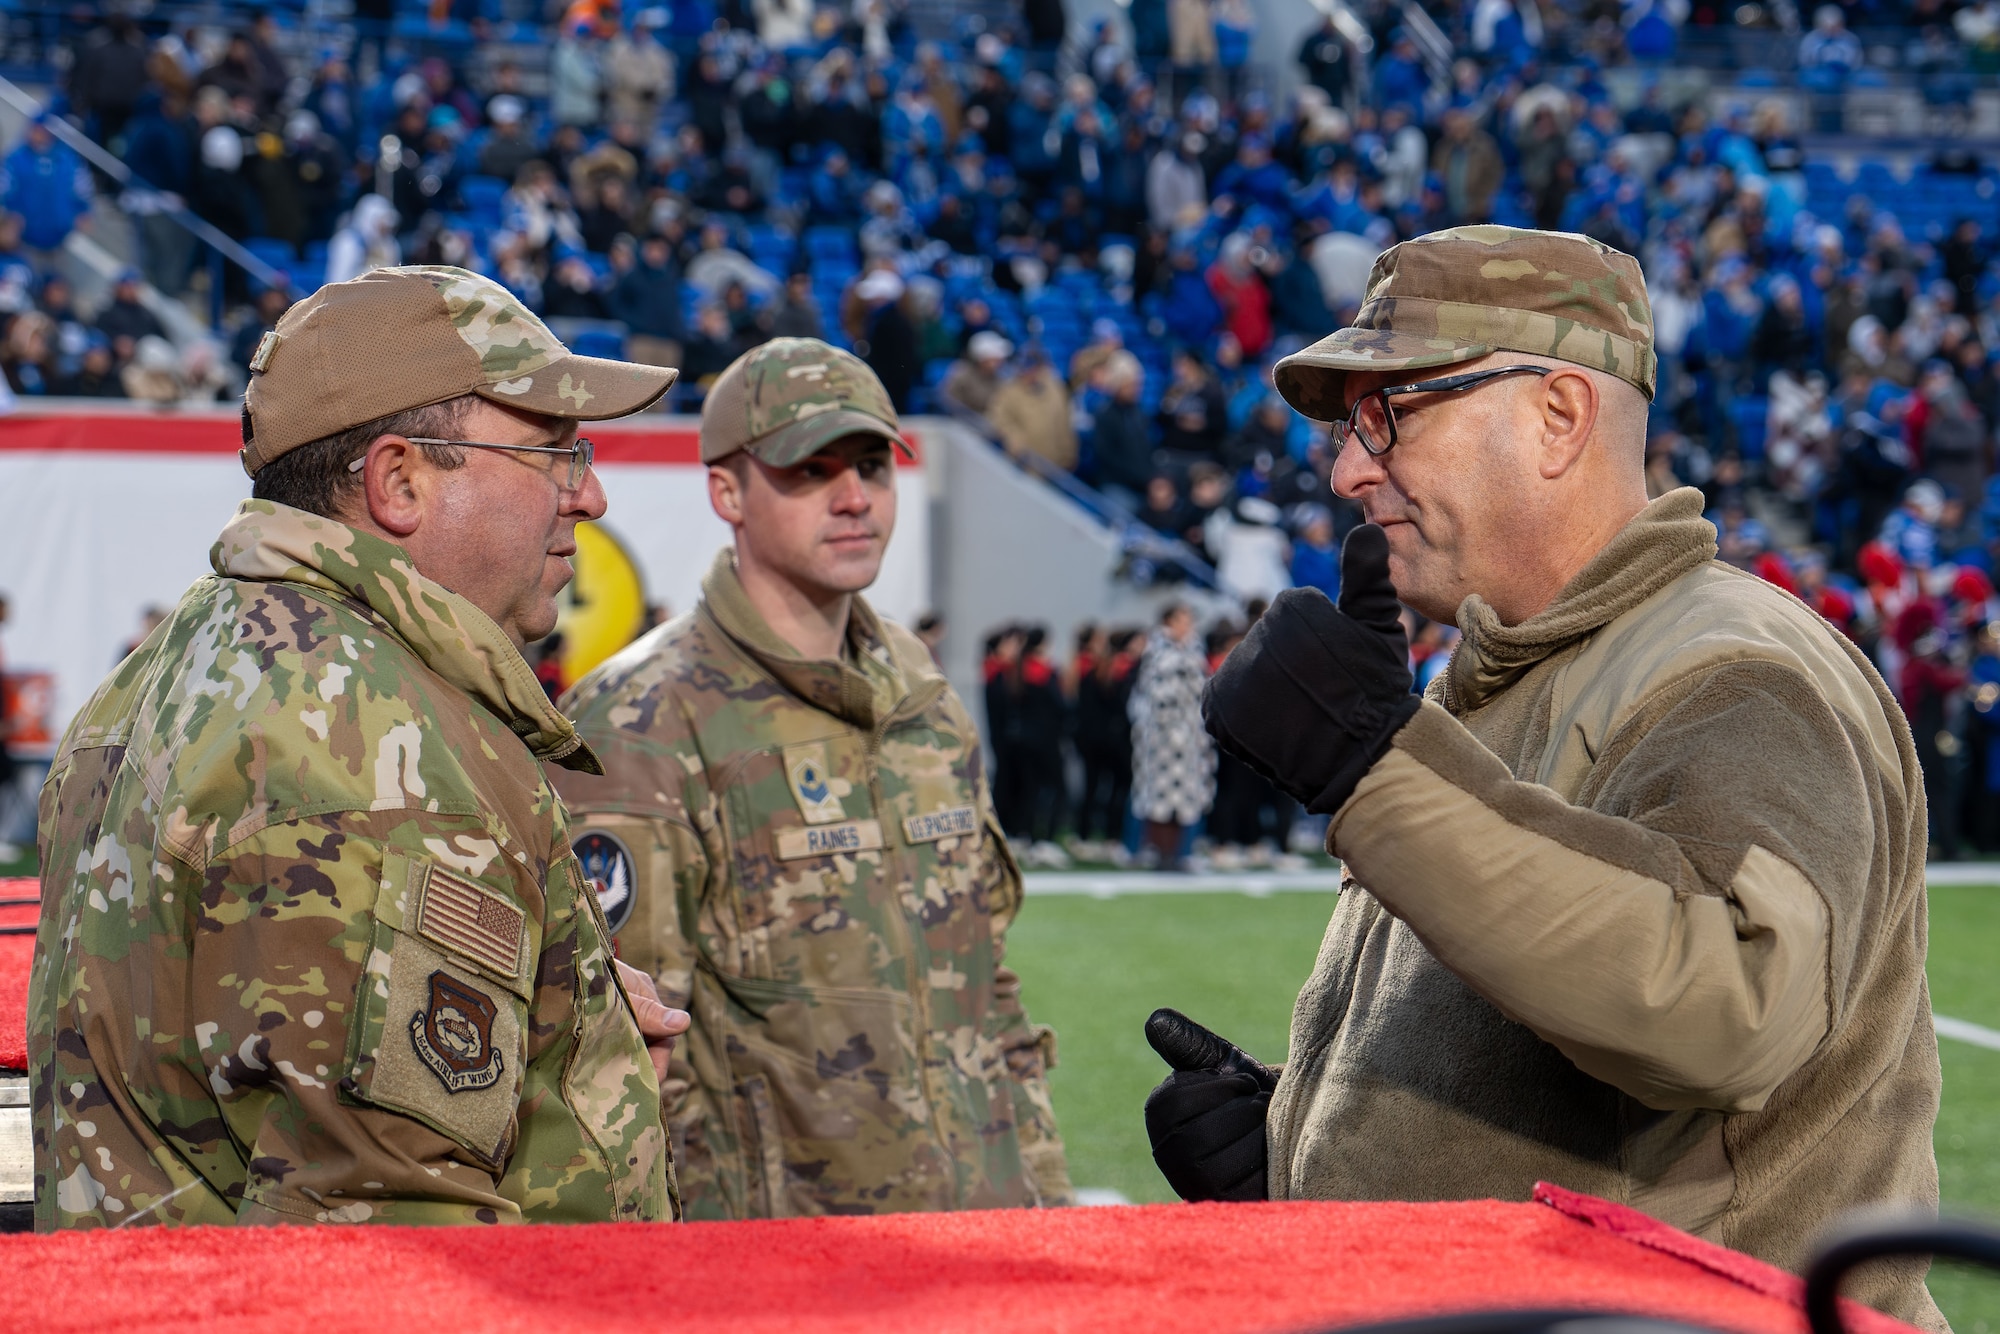 A photo of three military personnel in military uniform having a conversation on a football field. The man in the foreground is gesturing while speaking to the other. A third person is in the background, slightly out of focus. They are standing on a red carpet with a stadium full of spectators in the background.